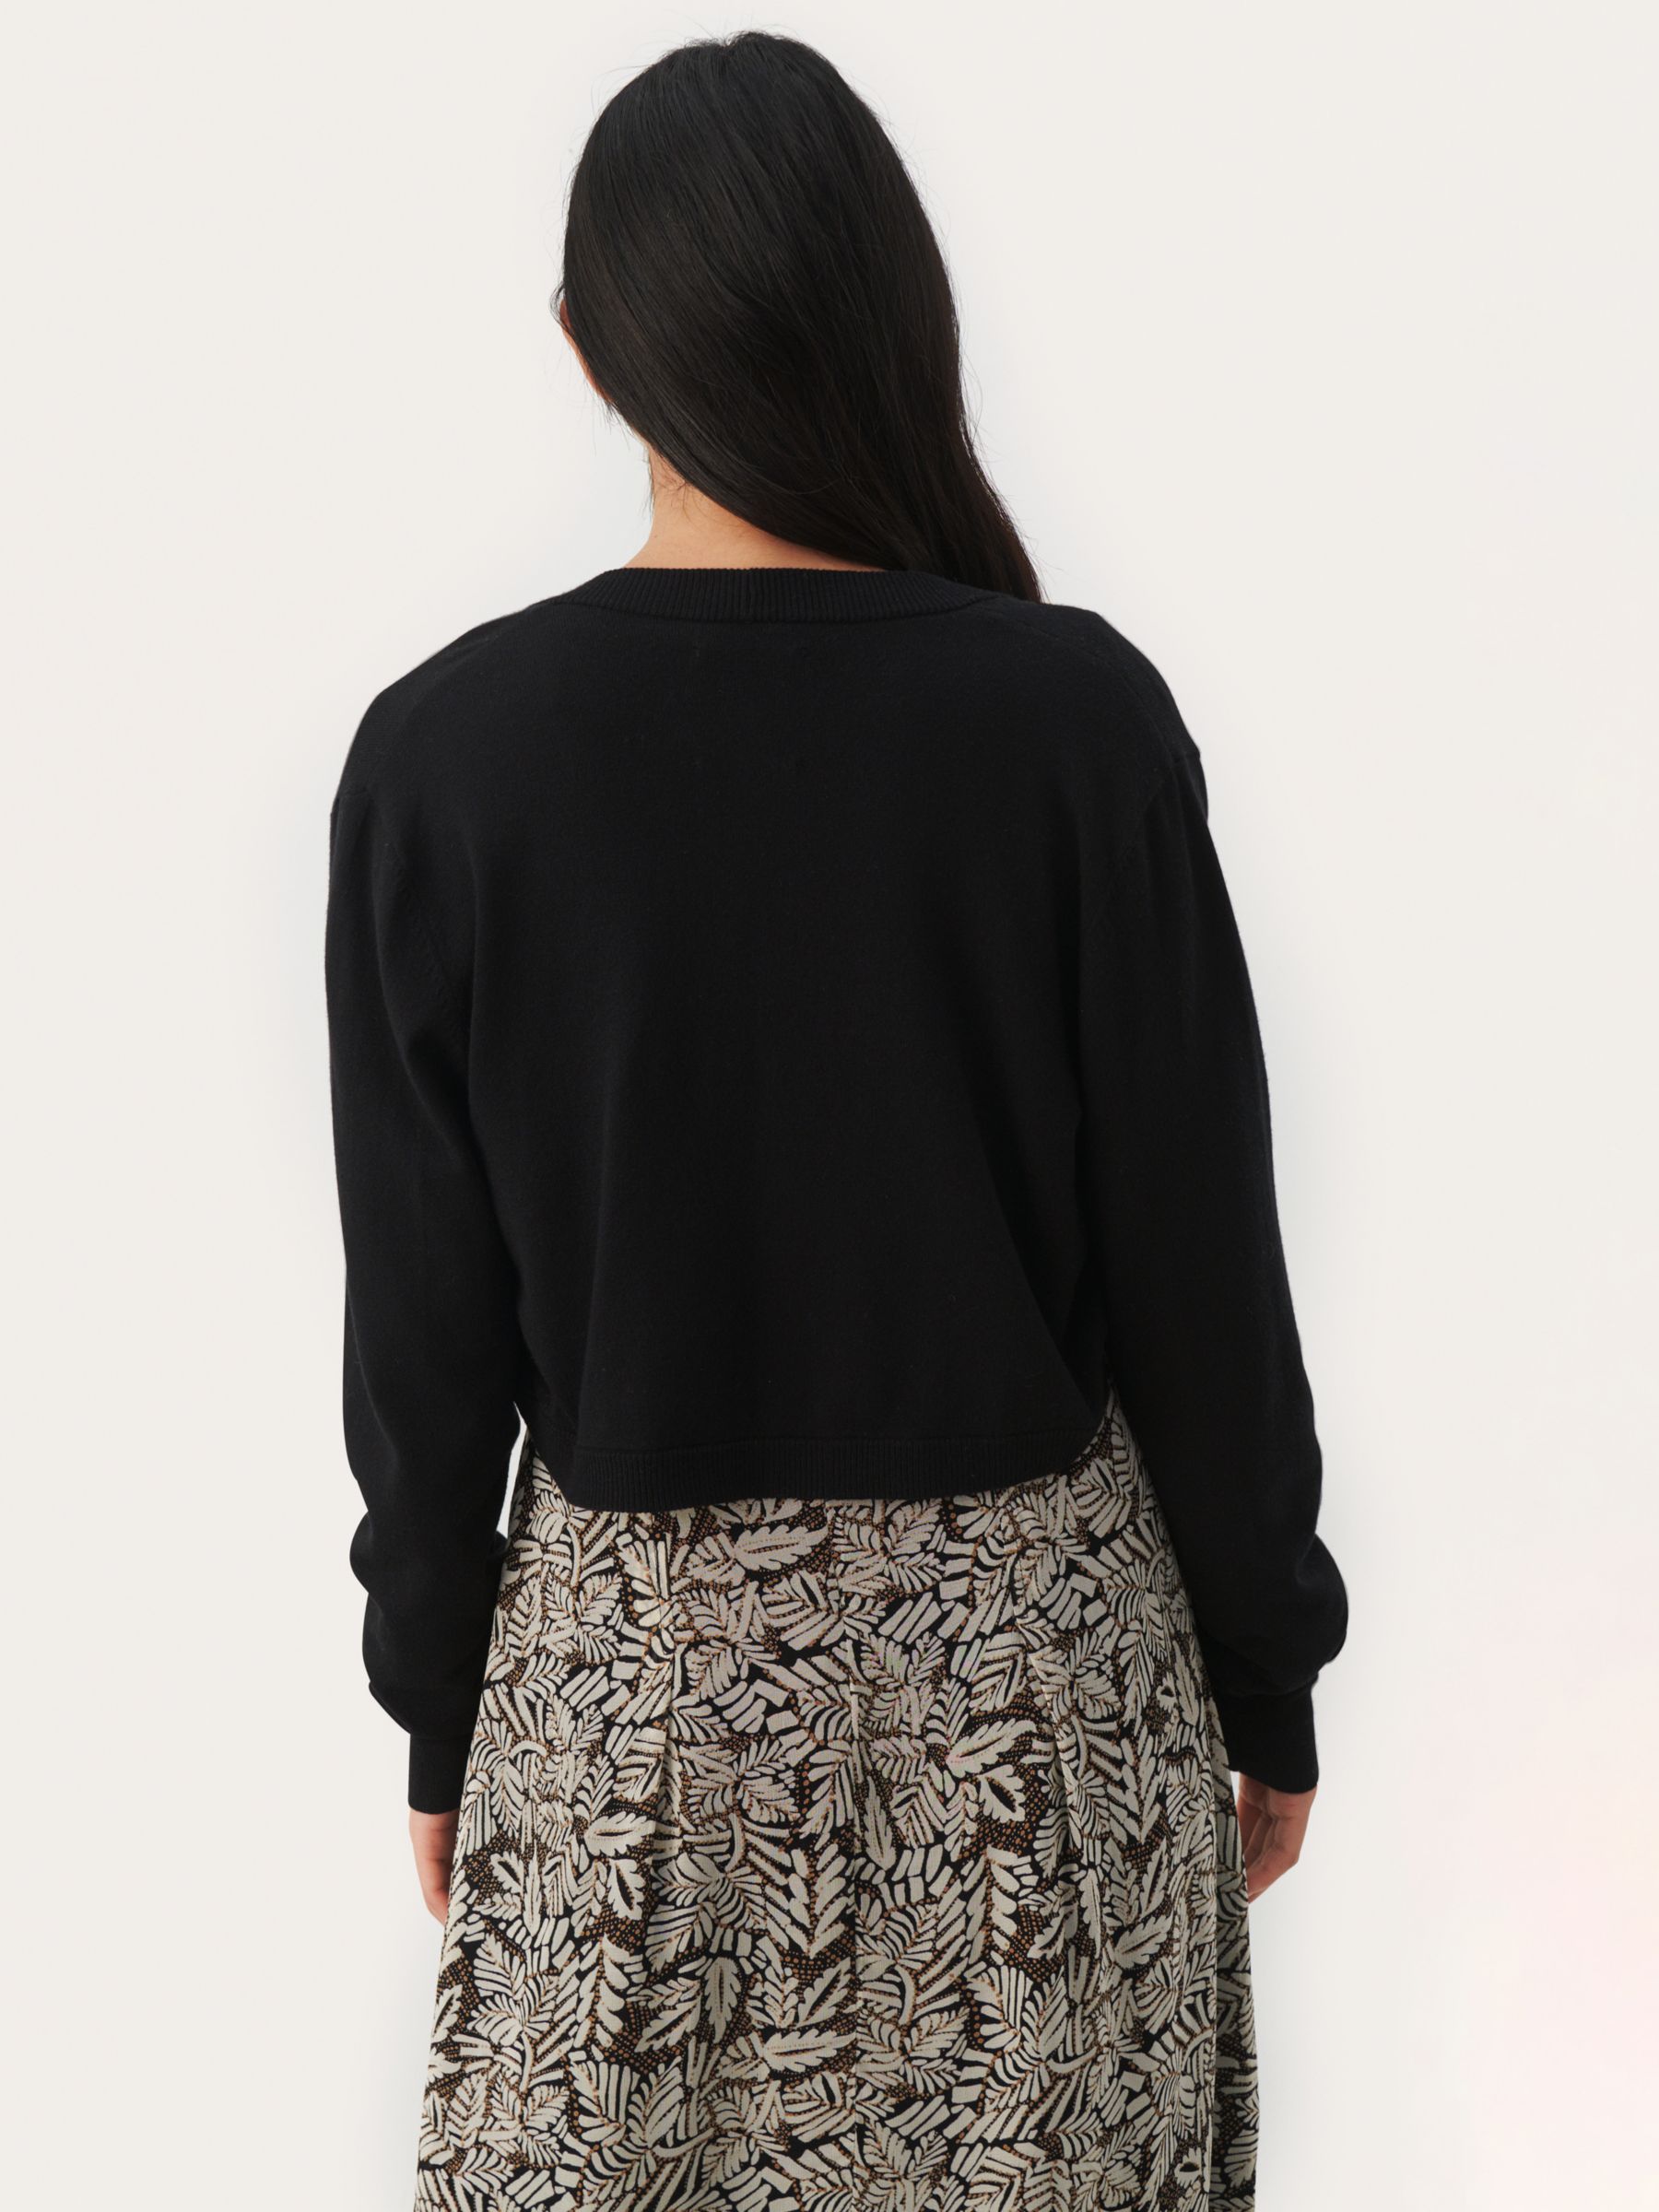 Buy Part Two Cellines Long Sleeve Cropped Cardigan Online at johnlewis.com